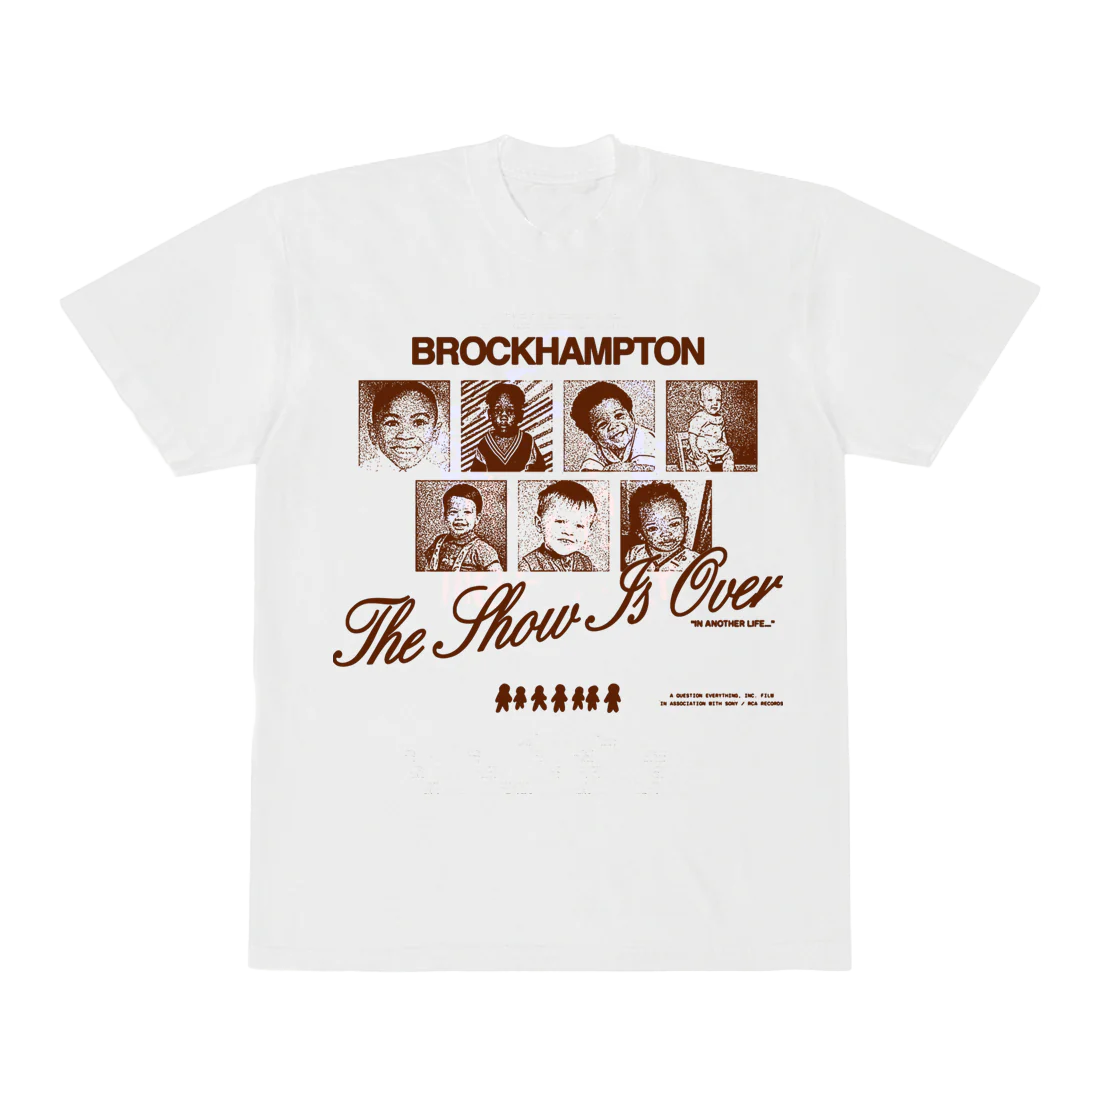 BROCKHAMPTON - The Show Is Over White T-Shirt